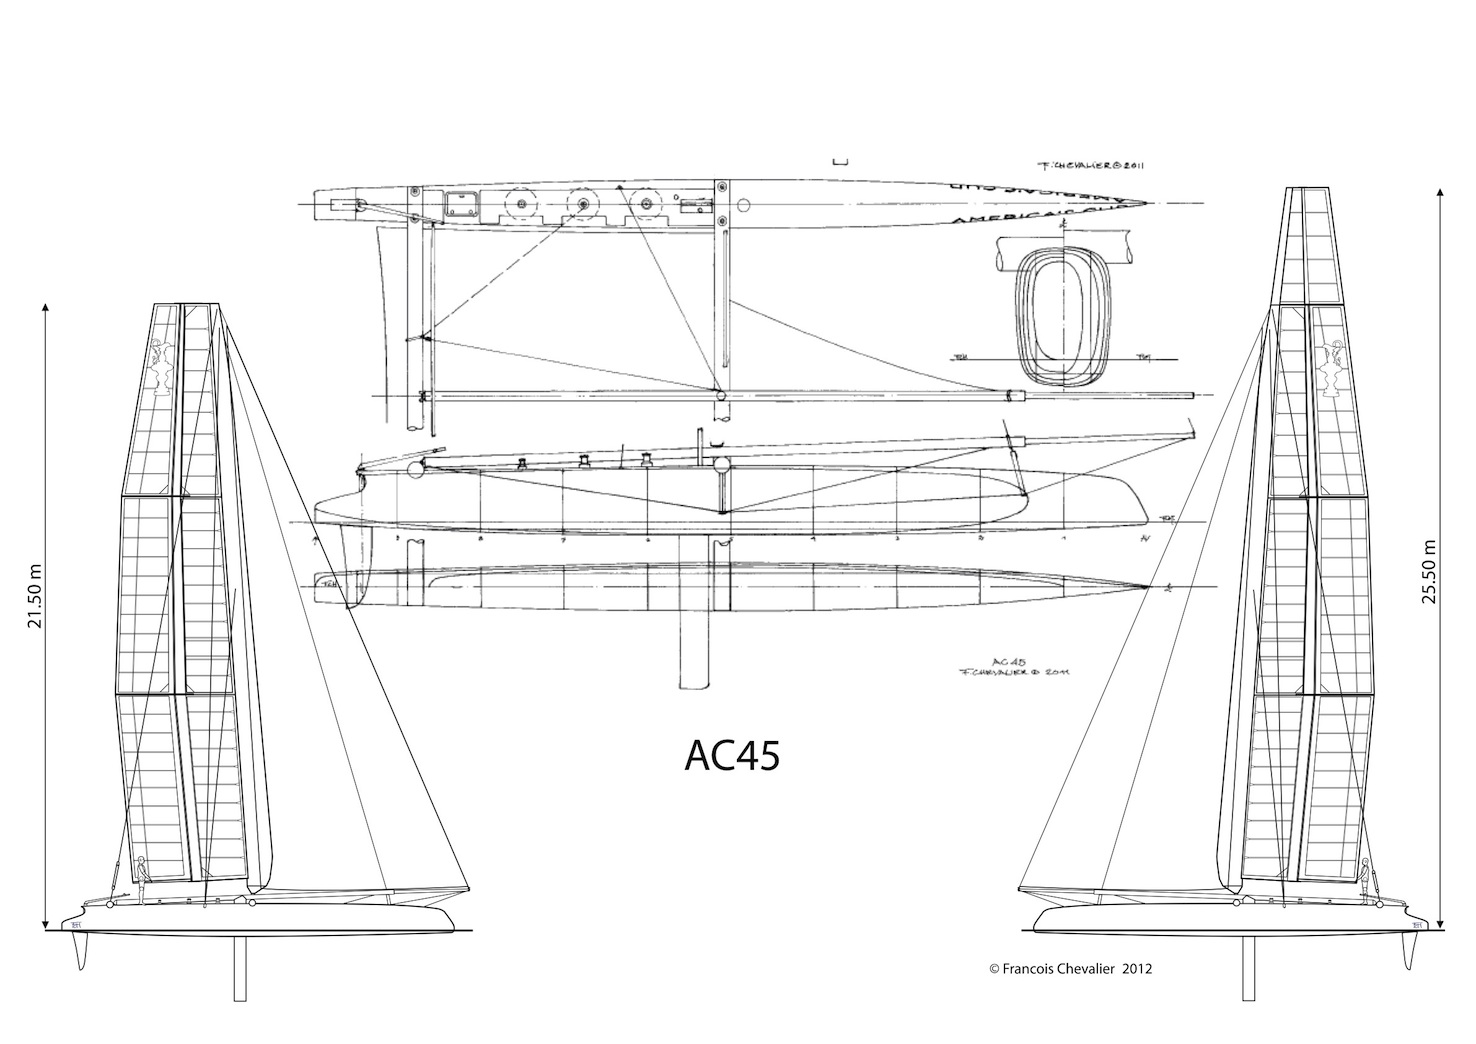 Chevalier Taglang: AMERICA'S CUP - AC45 PLANS - AC45 LINES ...